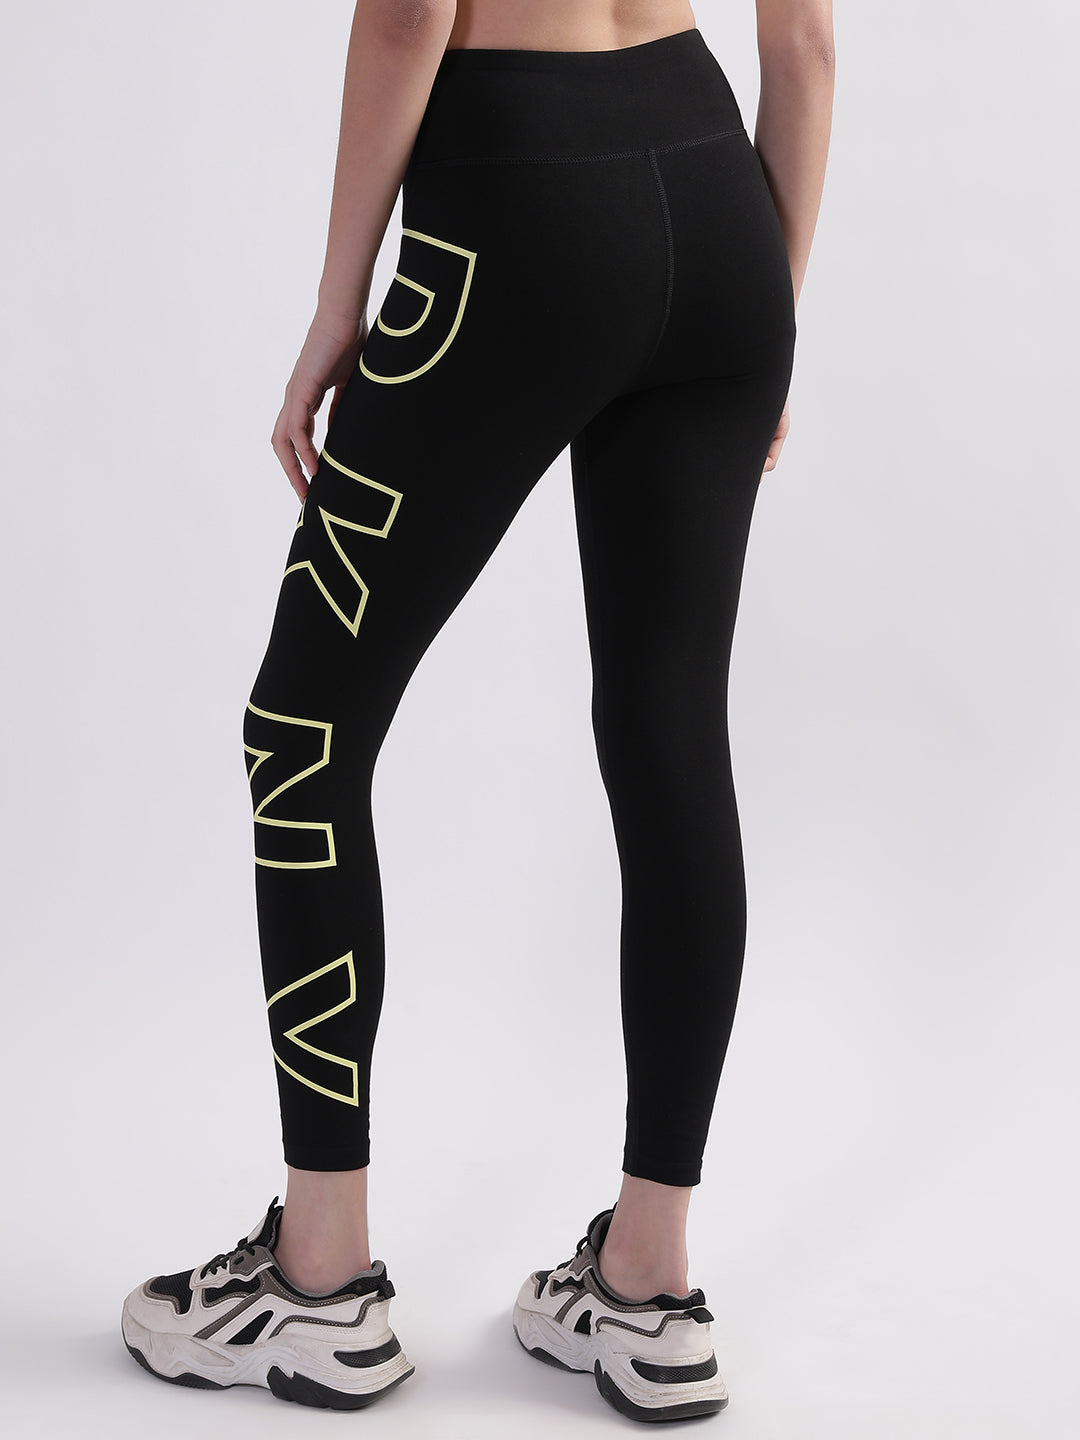 Shop DKNY Women Lime Solid Fitted Leggings